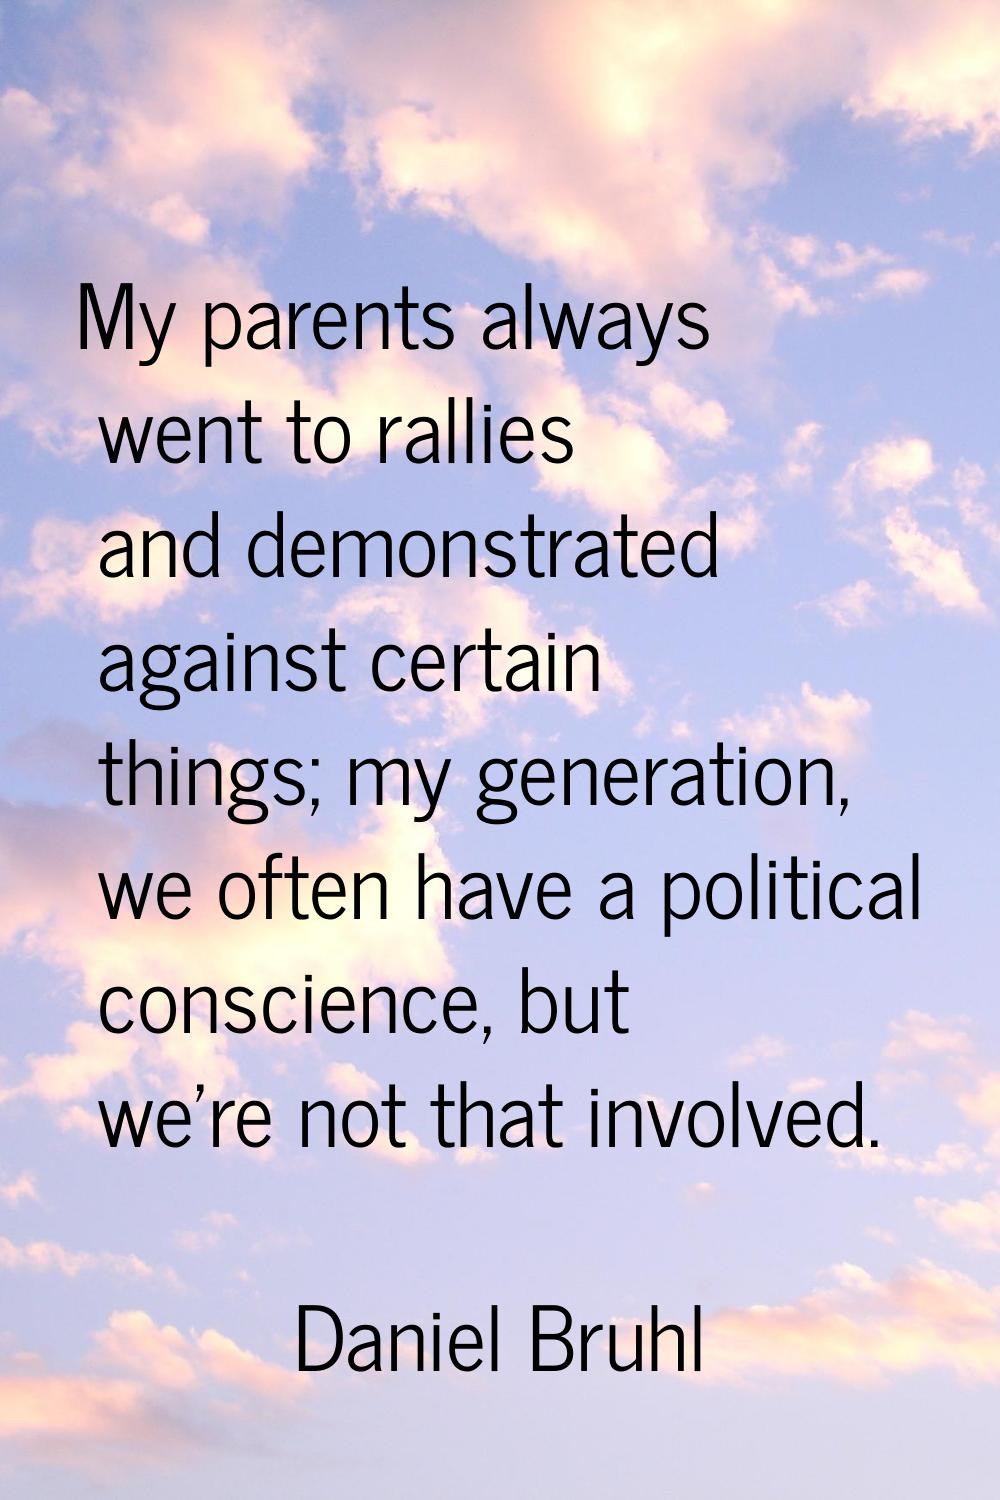 My parents always went to rallies and demonstrated against certain things; my generation, we often 